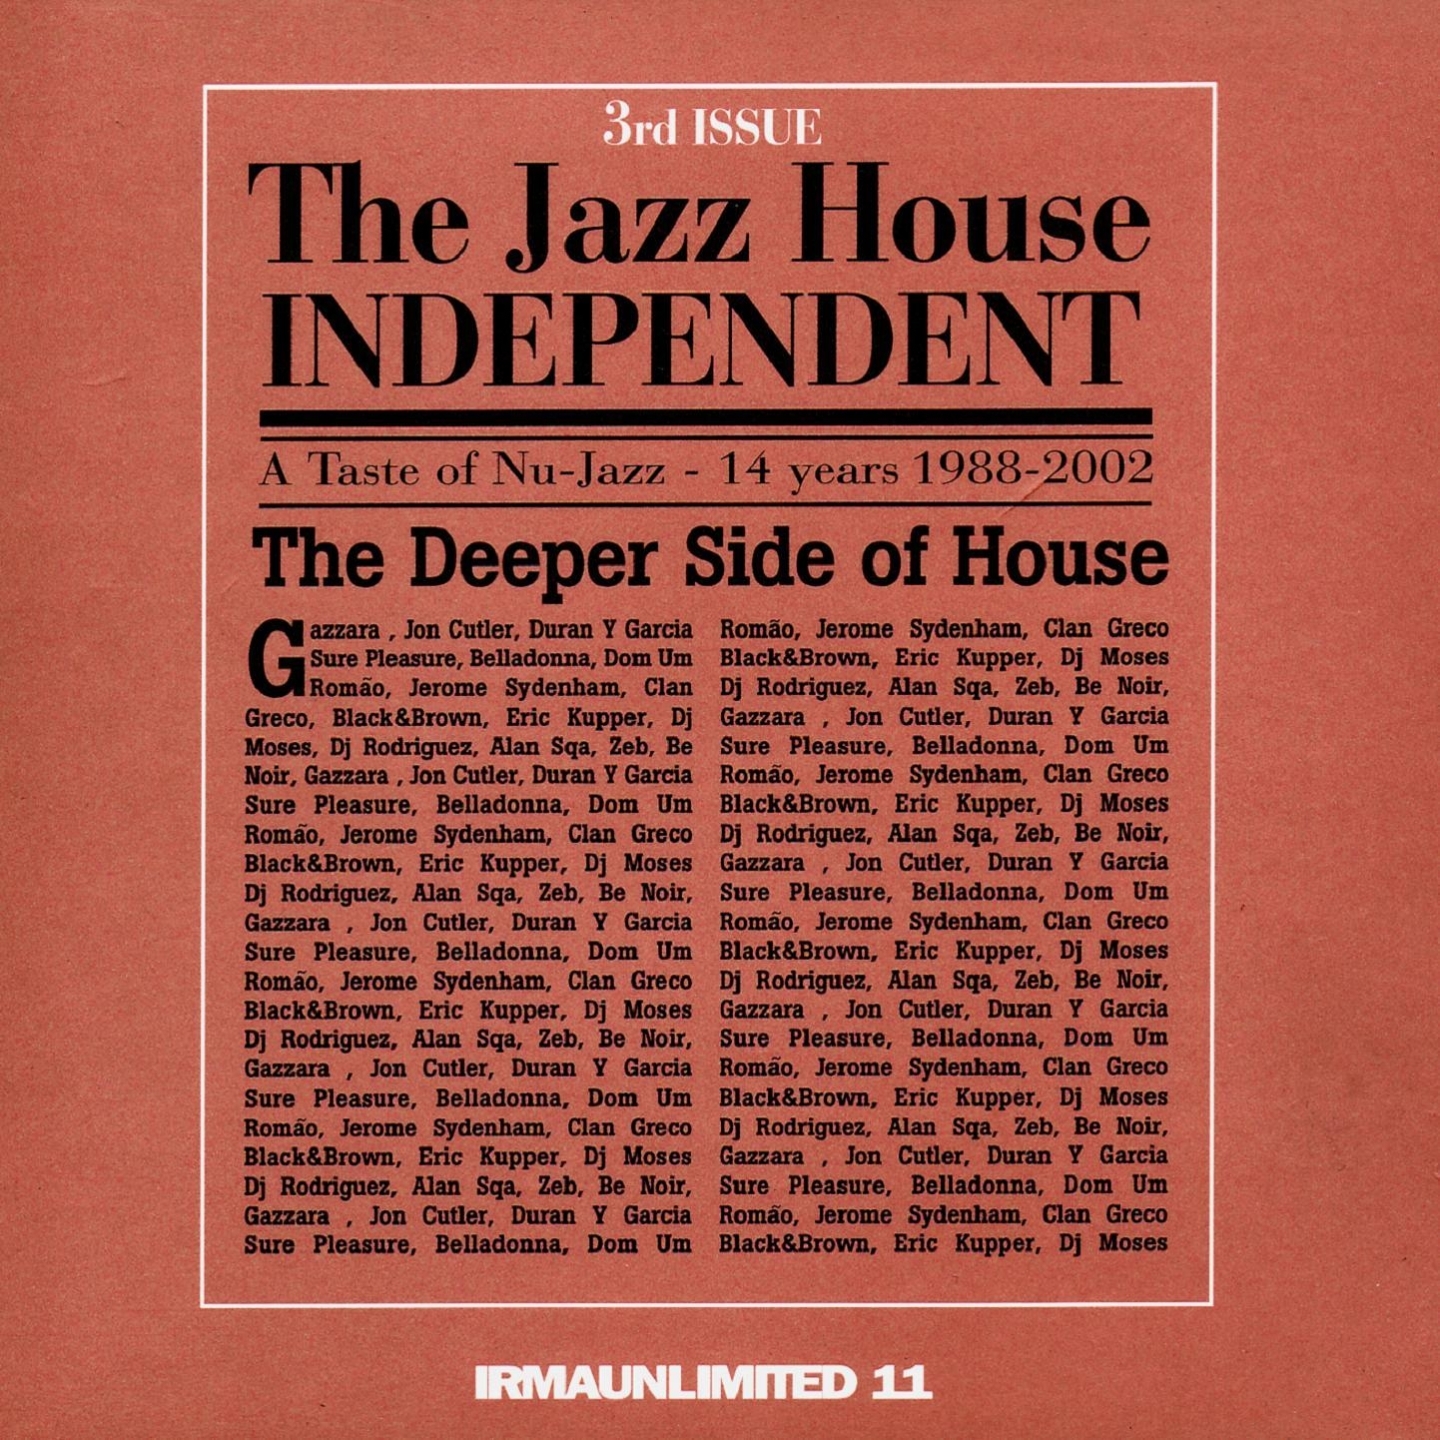 The Jazz House Independent, Vol. 3 (The Deeper Side of House)